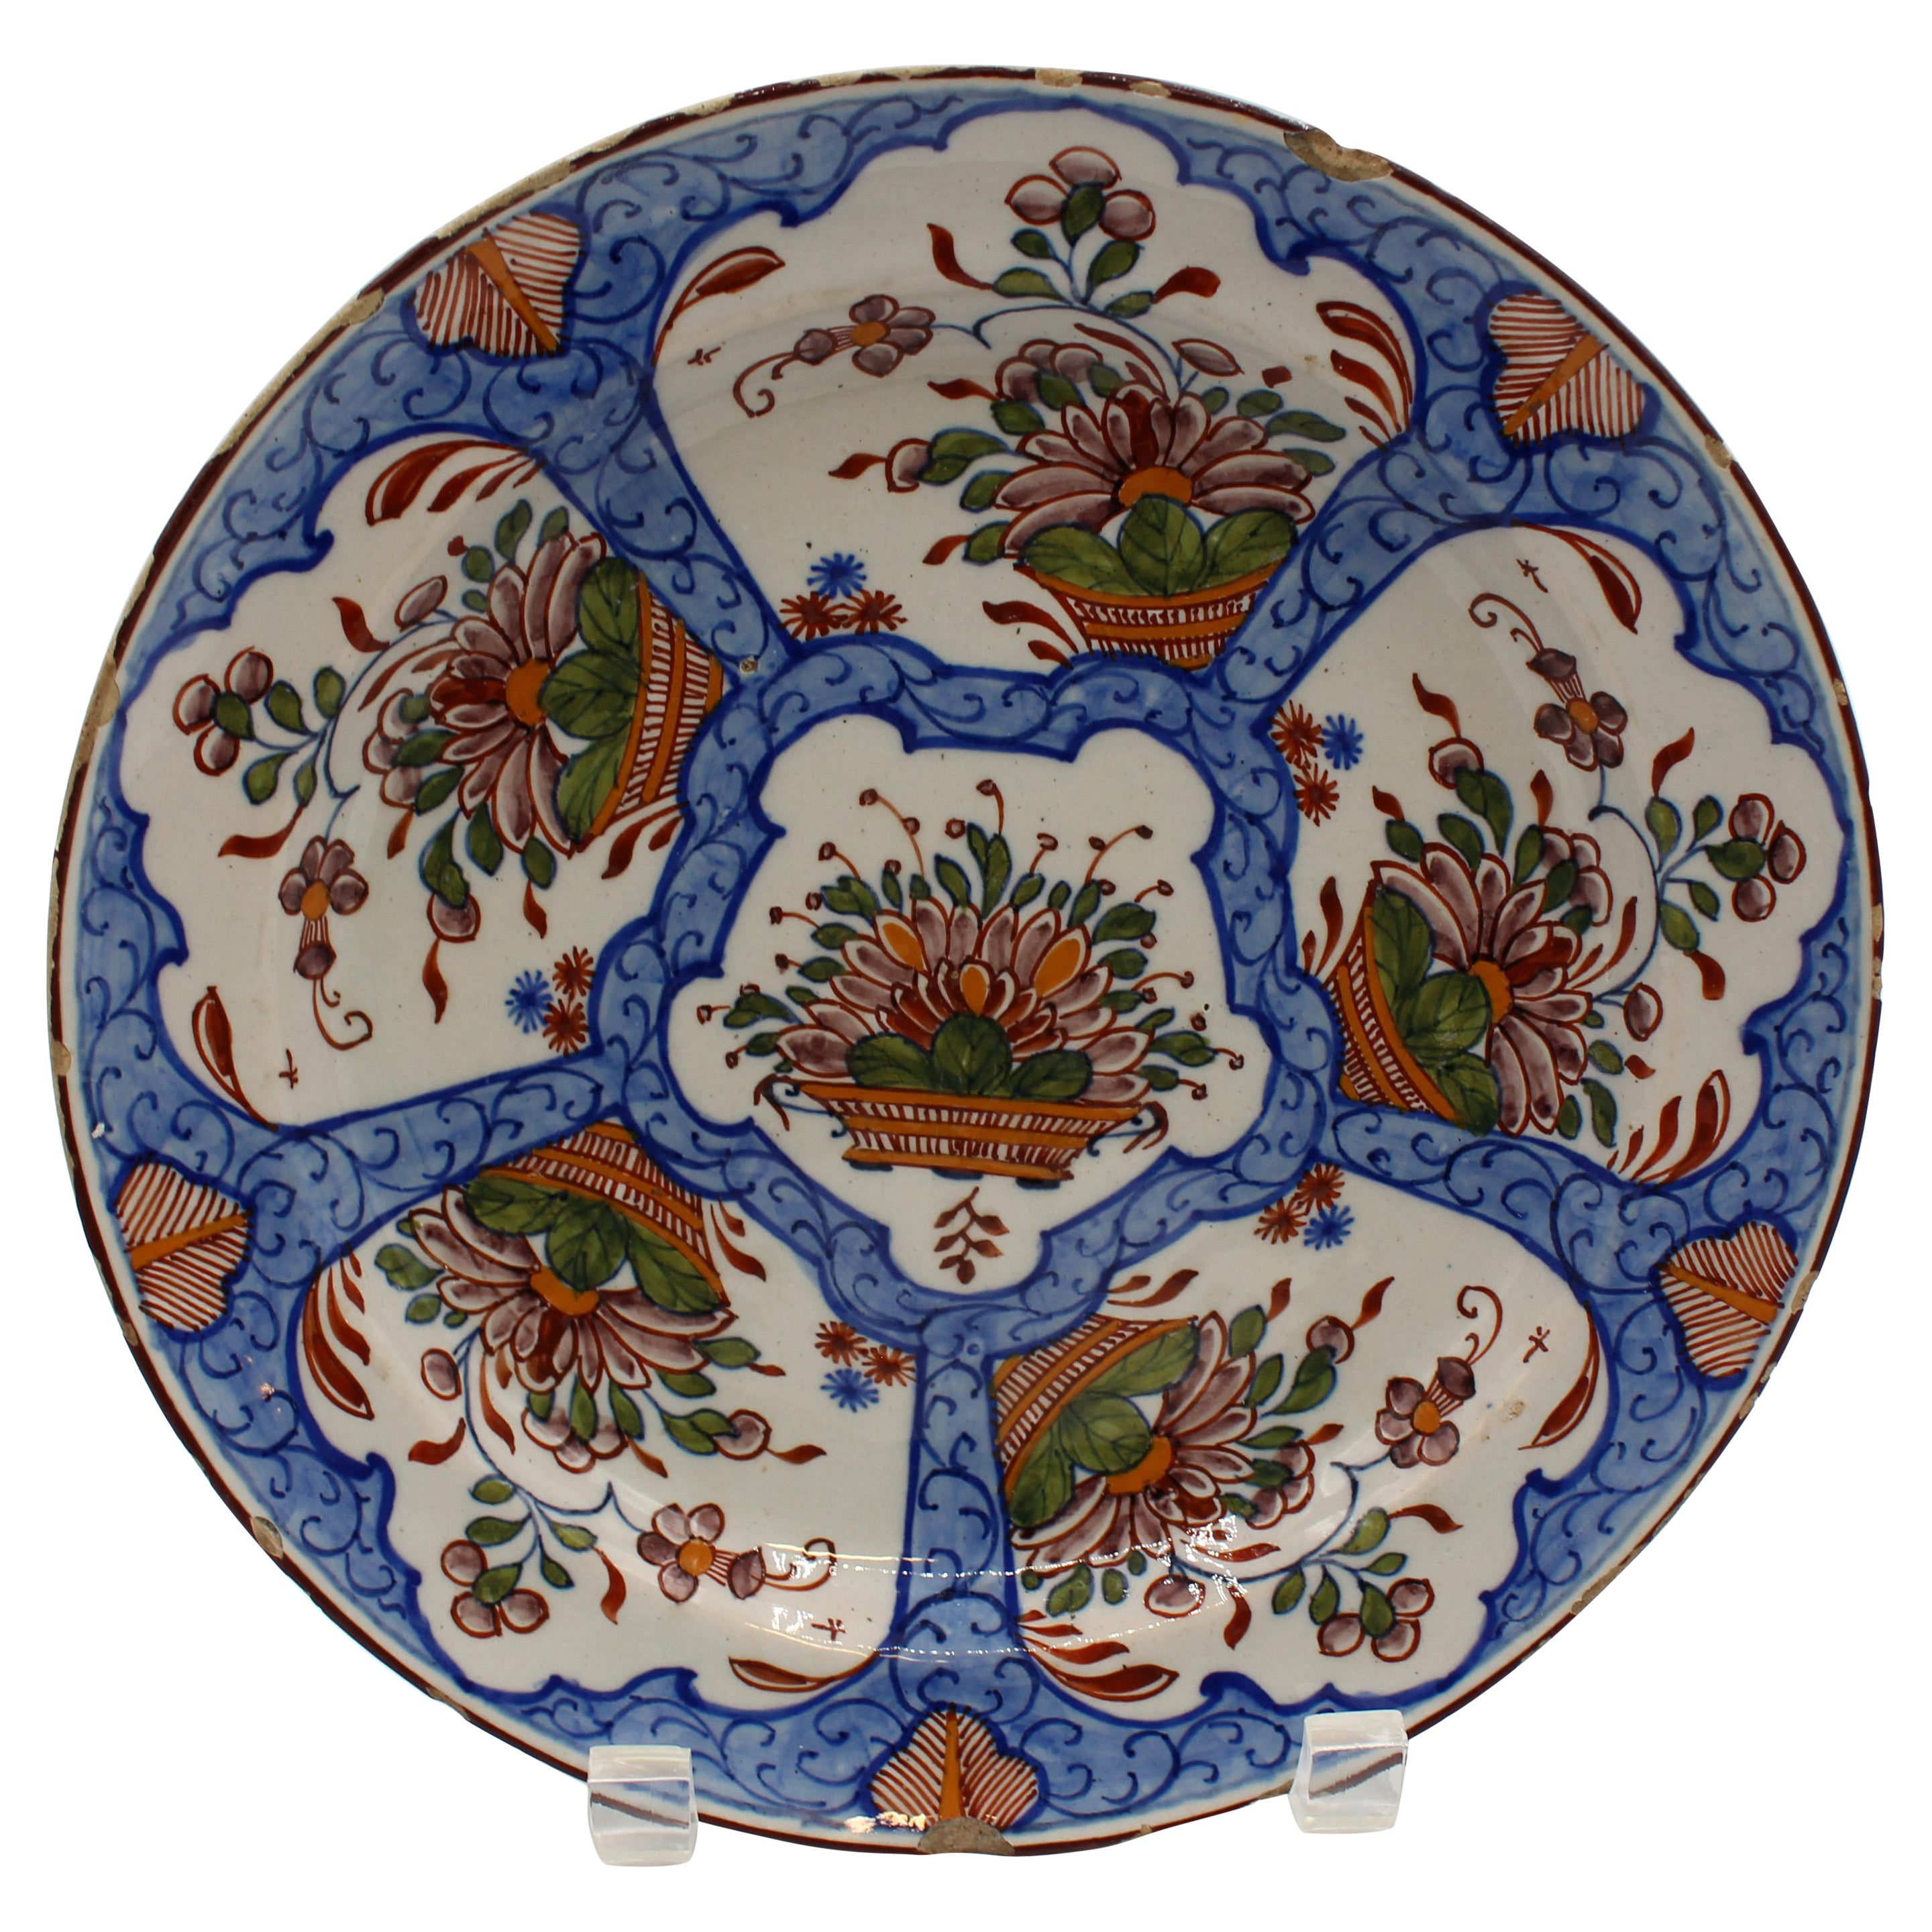 Circa 1770 Delft Polychrome Low Bowl or Plate For Sale